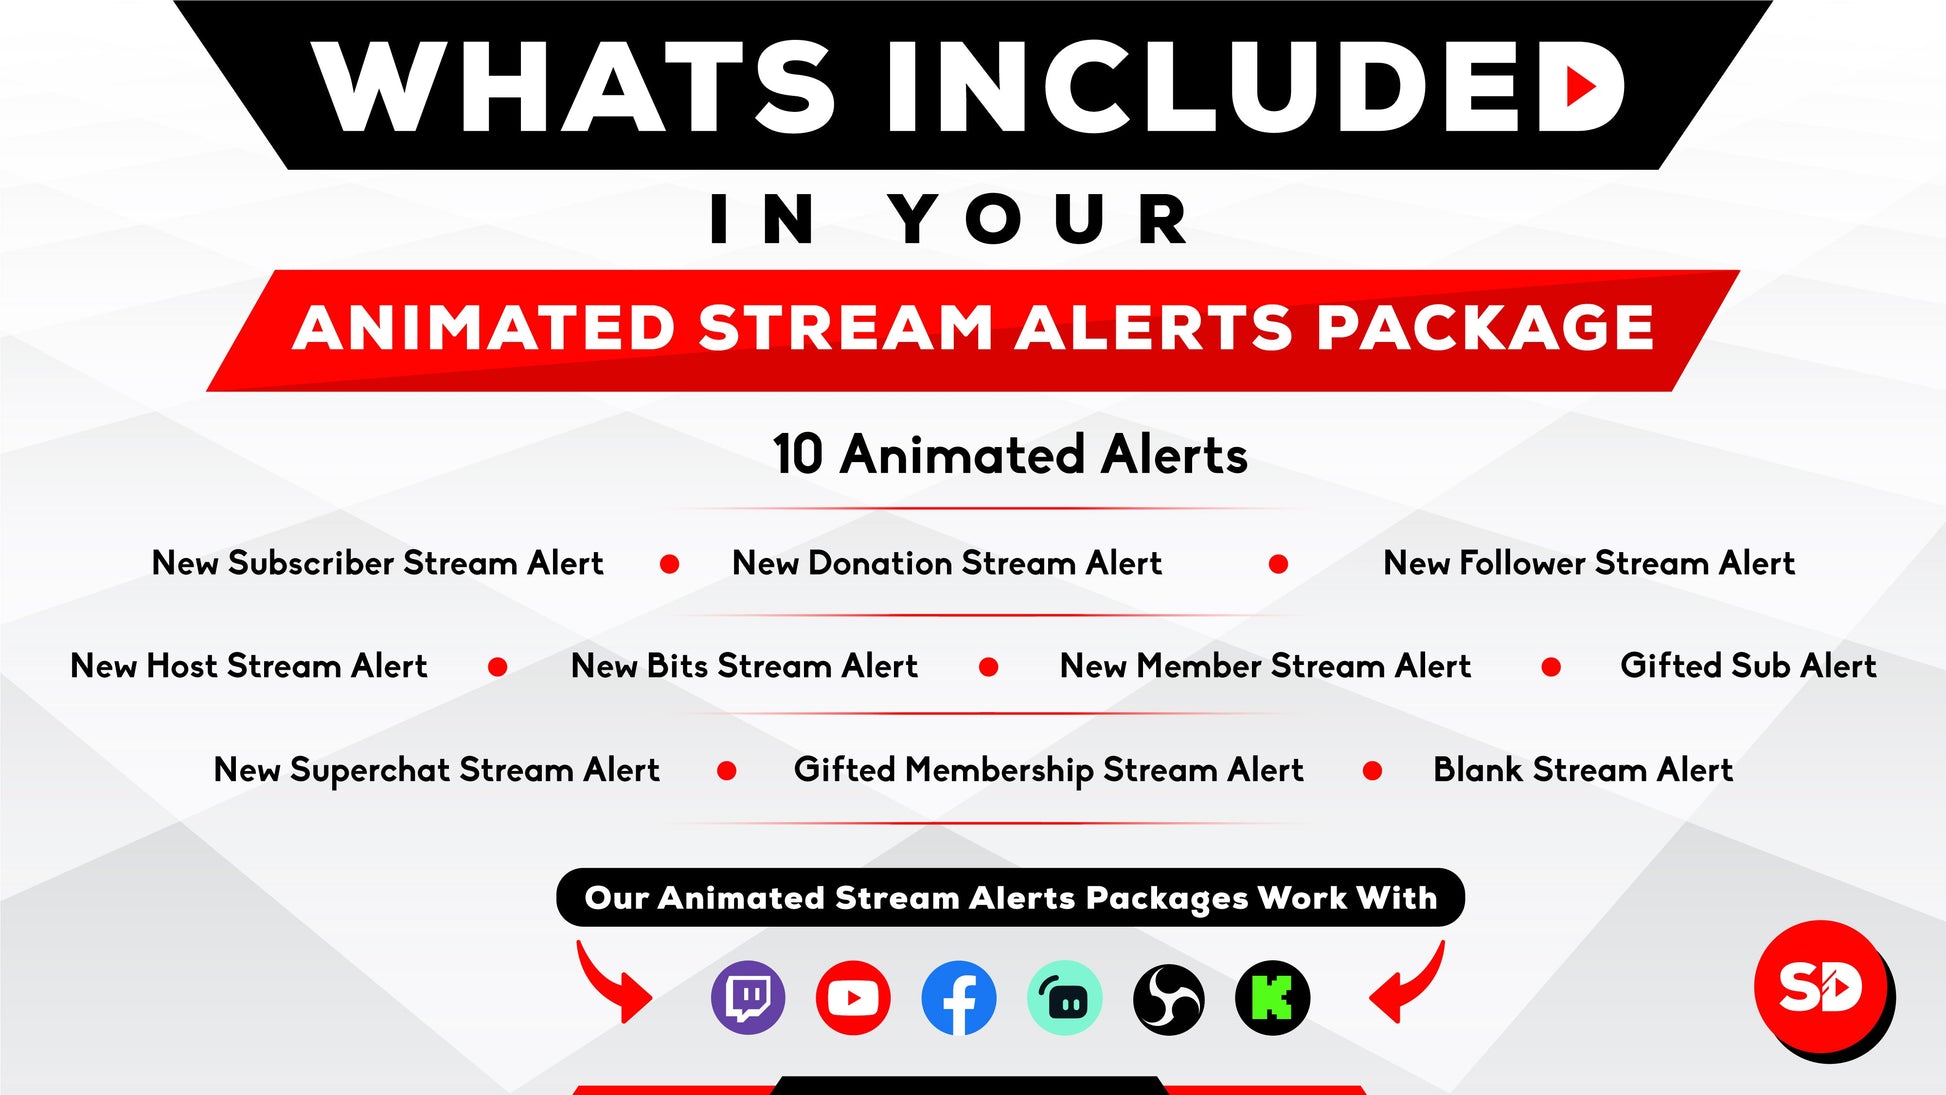 whats included in your package - animated alerts - outlaw - stream designz